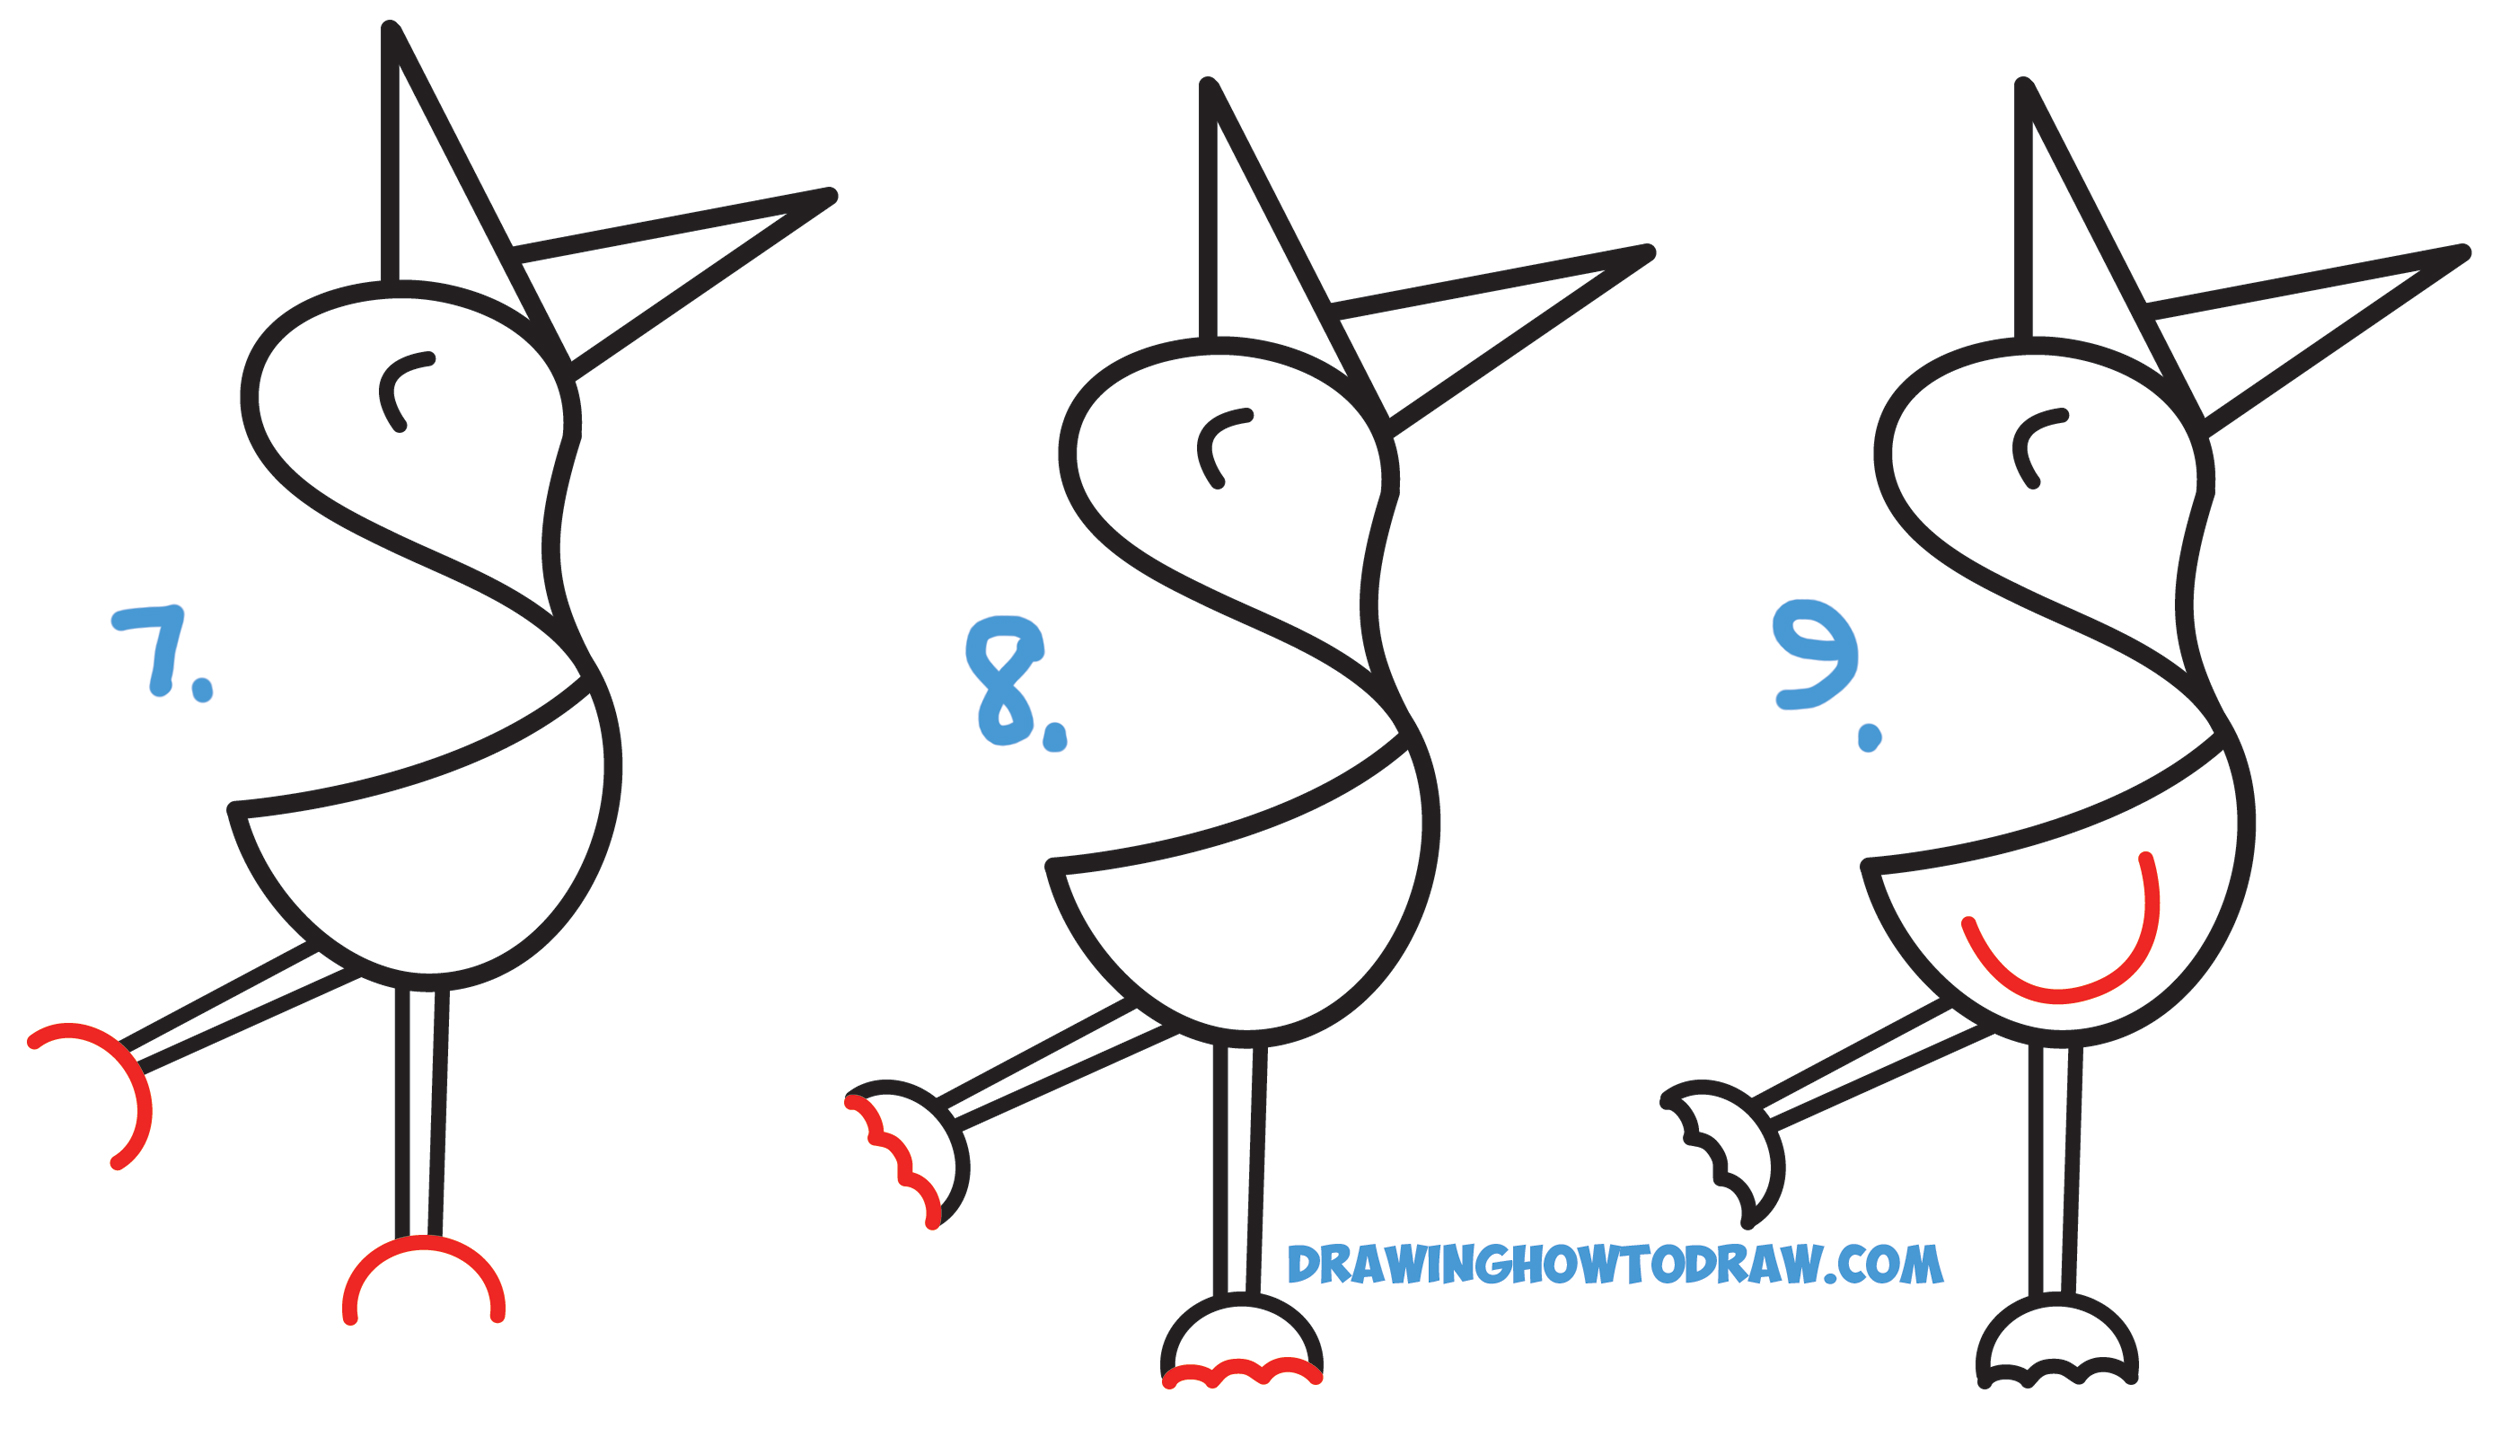 Learn How to Draw a Cute Cartoon Bird / Duck from a Dollar Sign - Simple Steps Drawing Lesson for Kids & Beginners